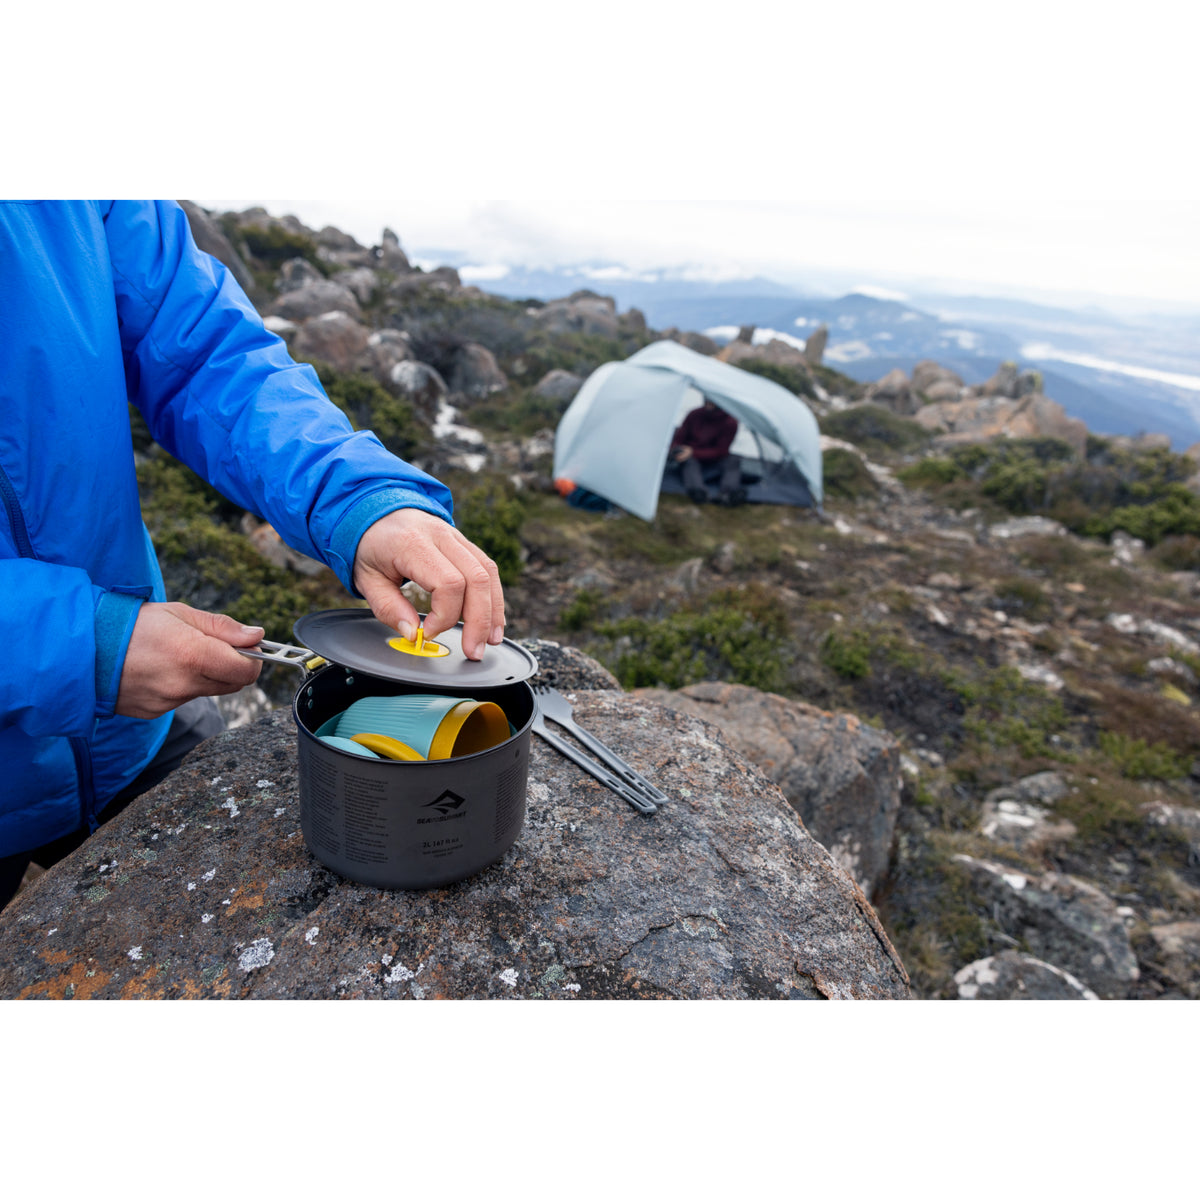 Sea to Summit Frontier Ultralight One Pot Cook Set (1 Person, Small 3 Piece)